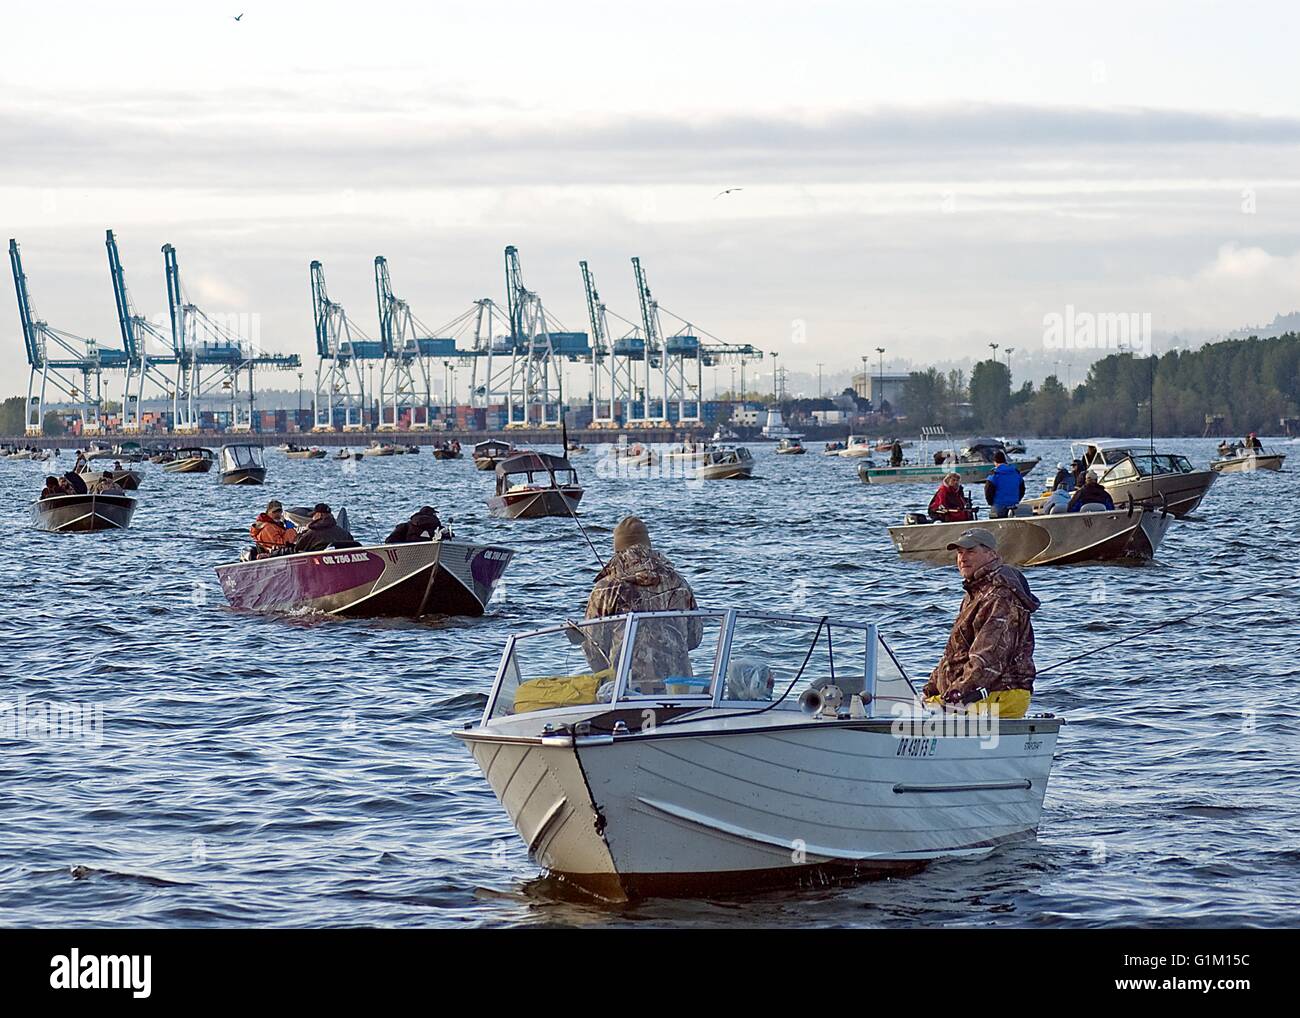 Dozens of fishing boats spread out along the Columbia River at the